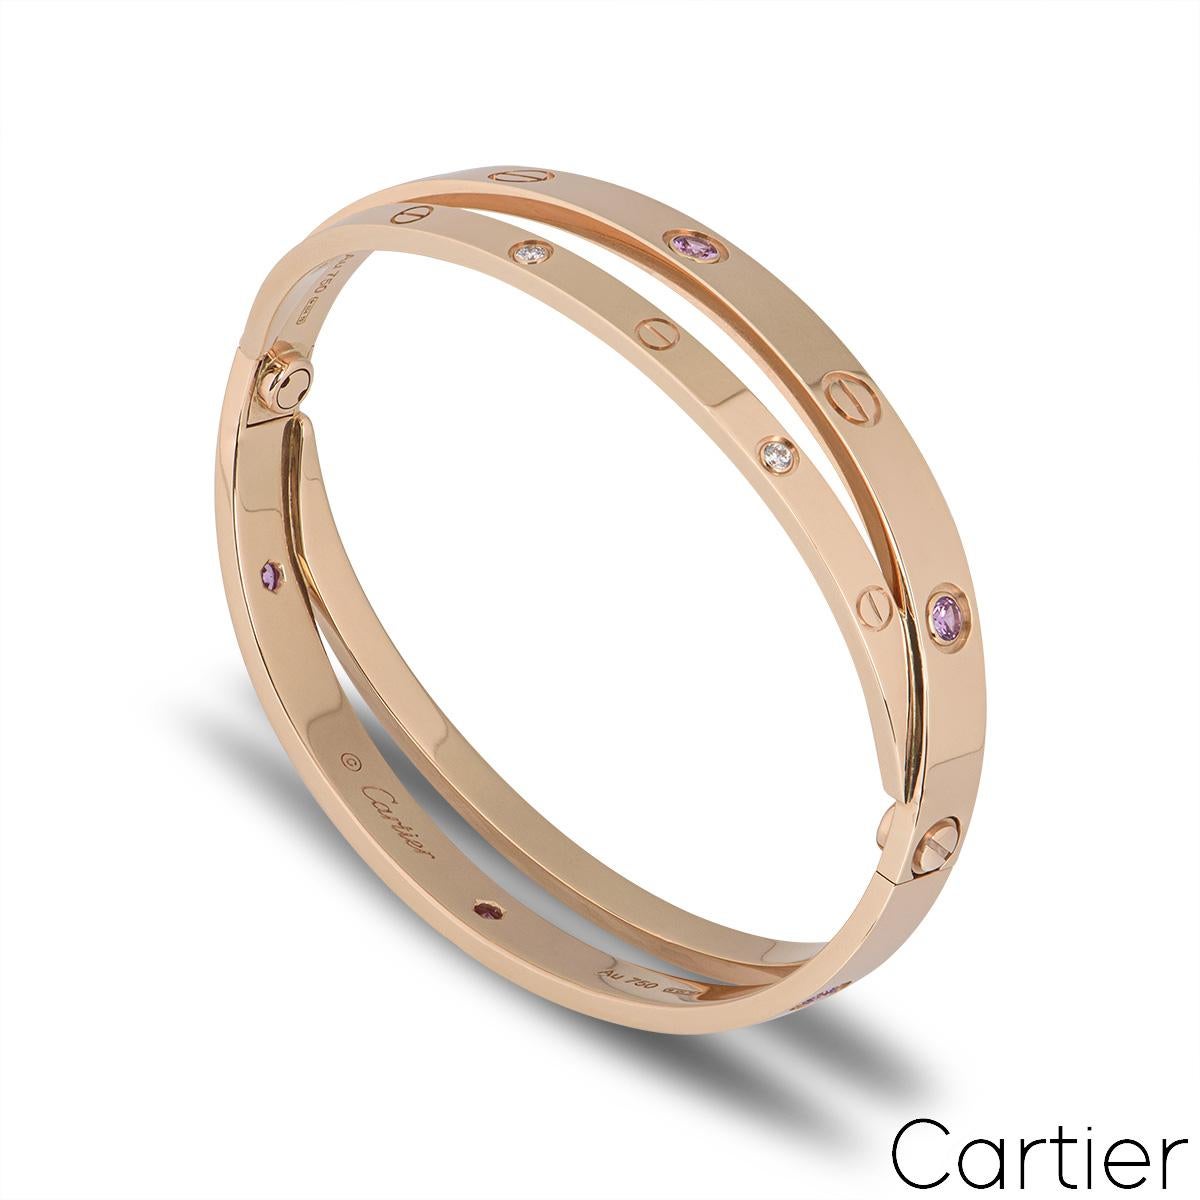 An 18k rose gold half diamond and pink sapphire double Cartier bracelet from the Love collection. The double bangle features the iconic screw motif alternating with 6 round brilliant cut diamonds and 6 pink sapphires displayed around the outer edge.